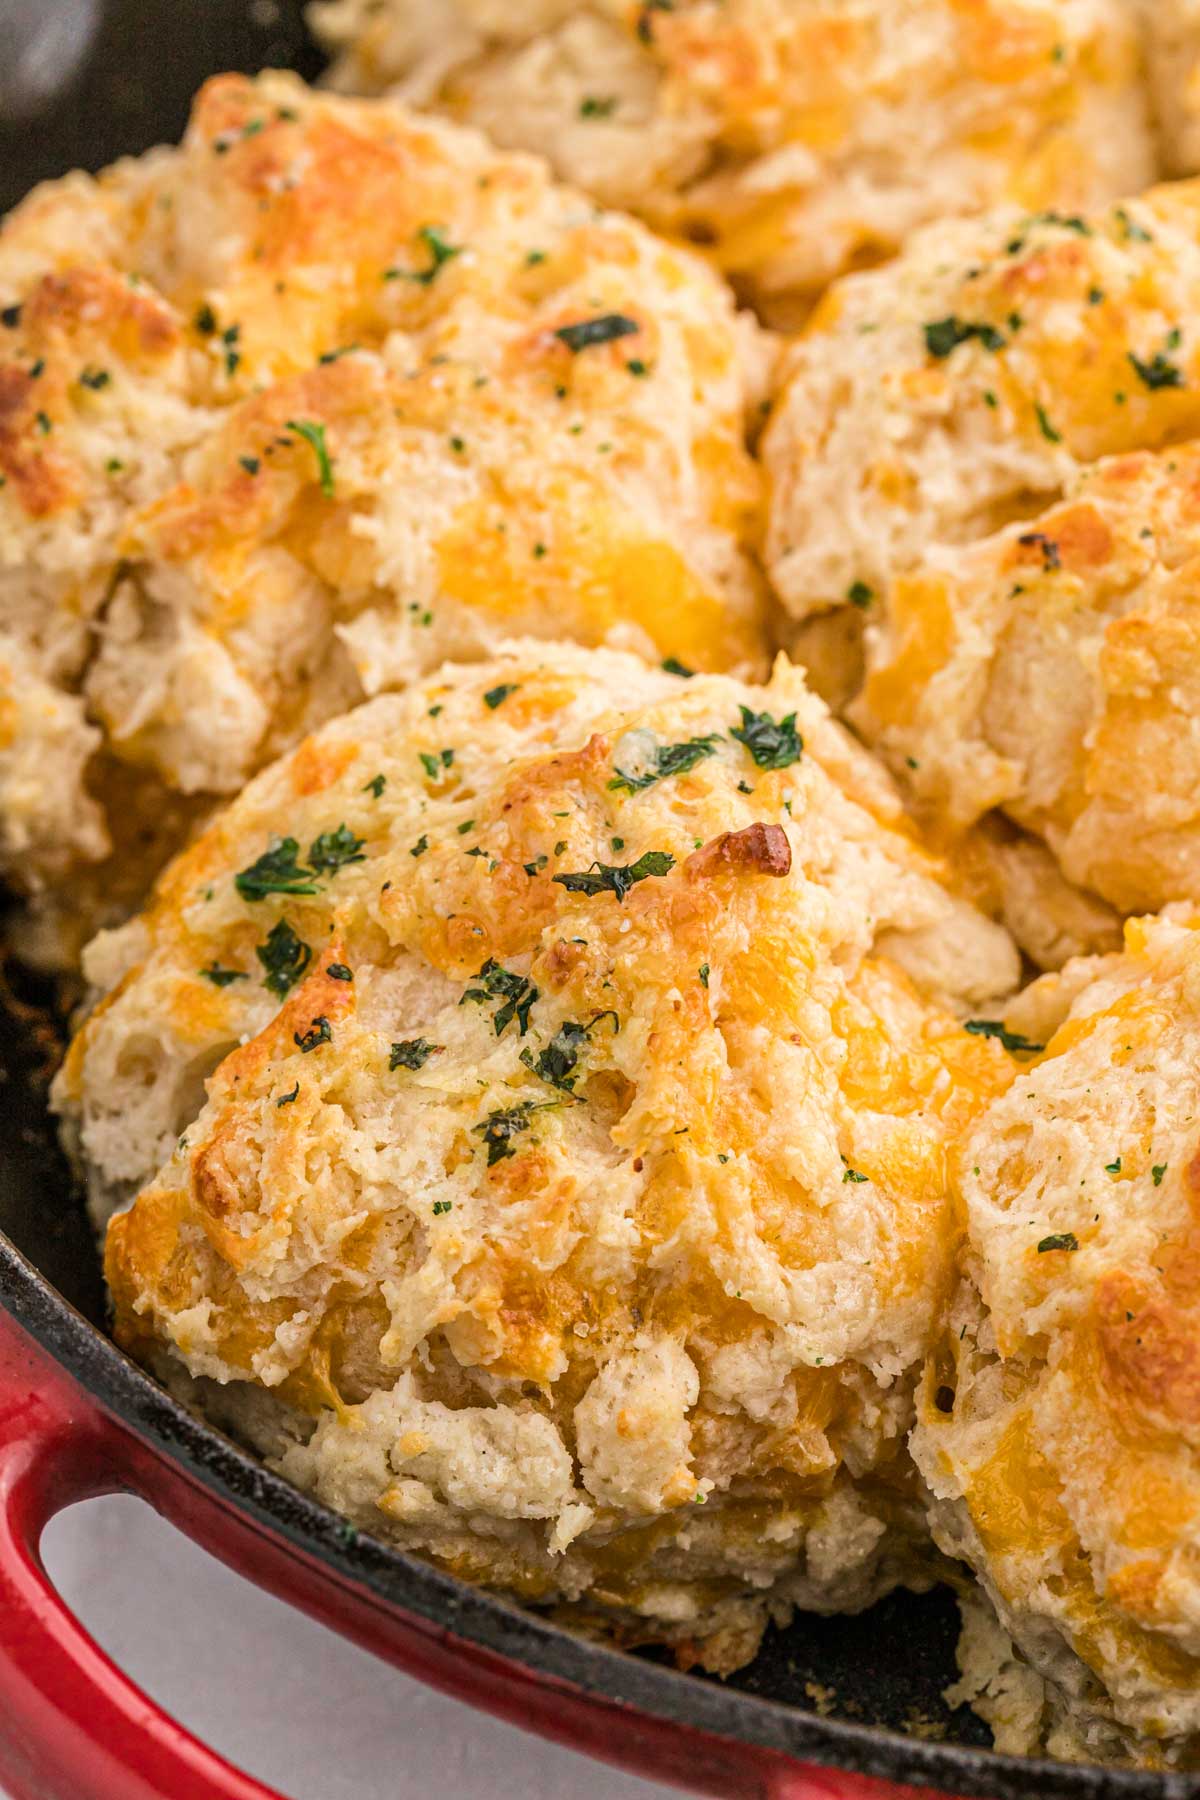 A pan of cheddar biscuits baked and ready to enjoy.